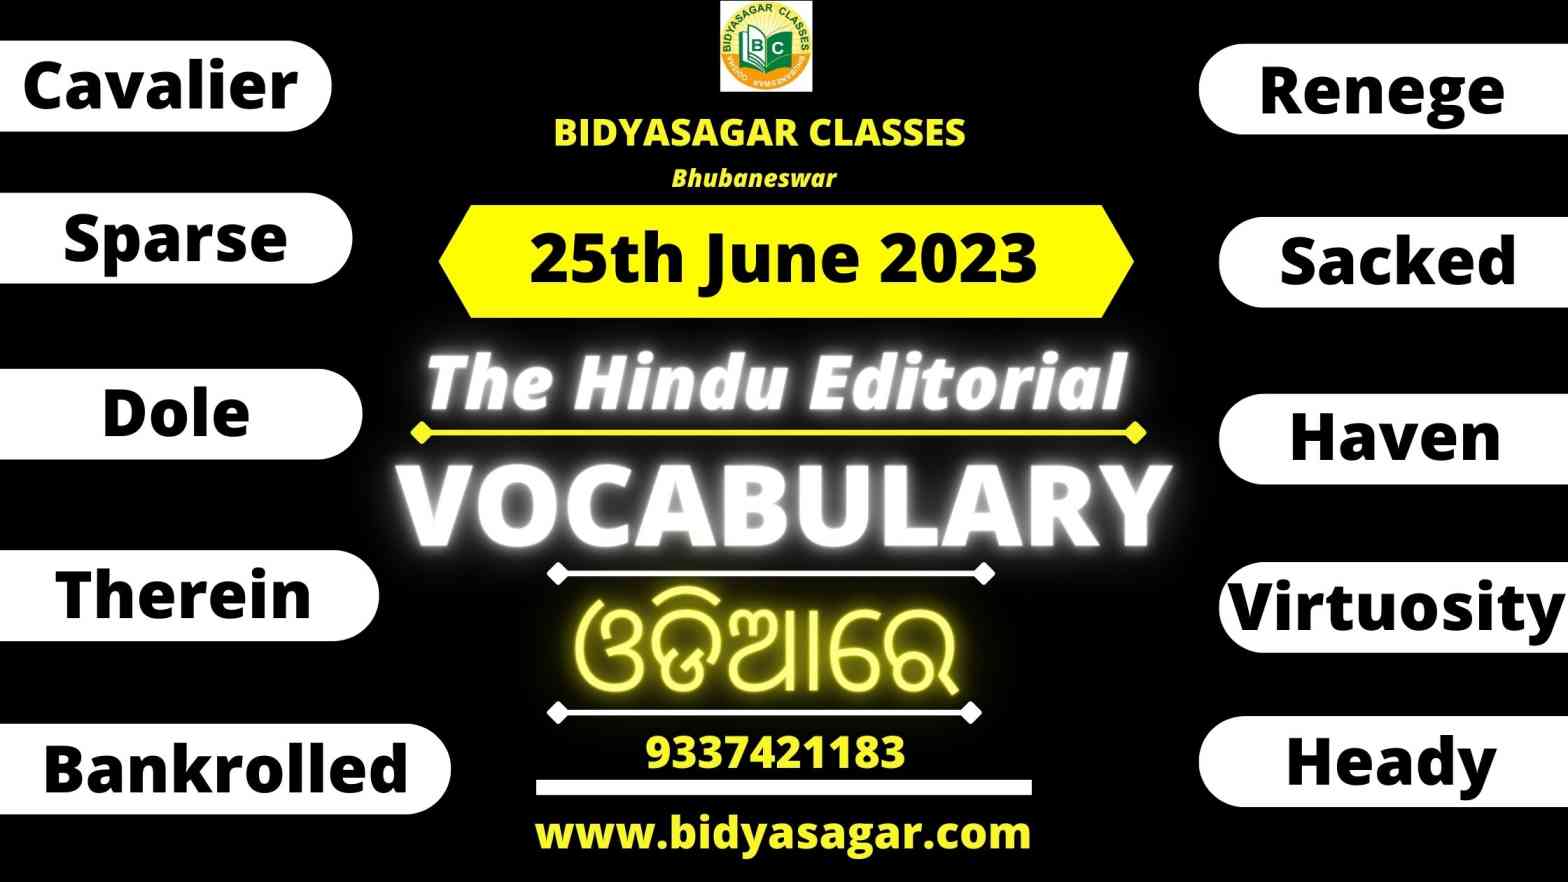 The Hindu Editorial Vocabulary of 25th June 2023